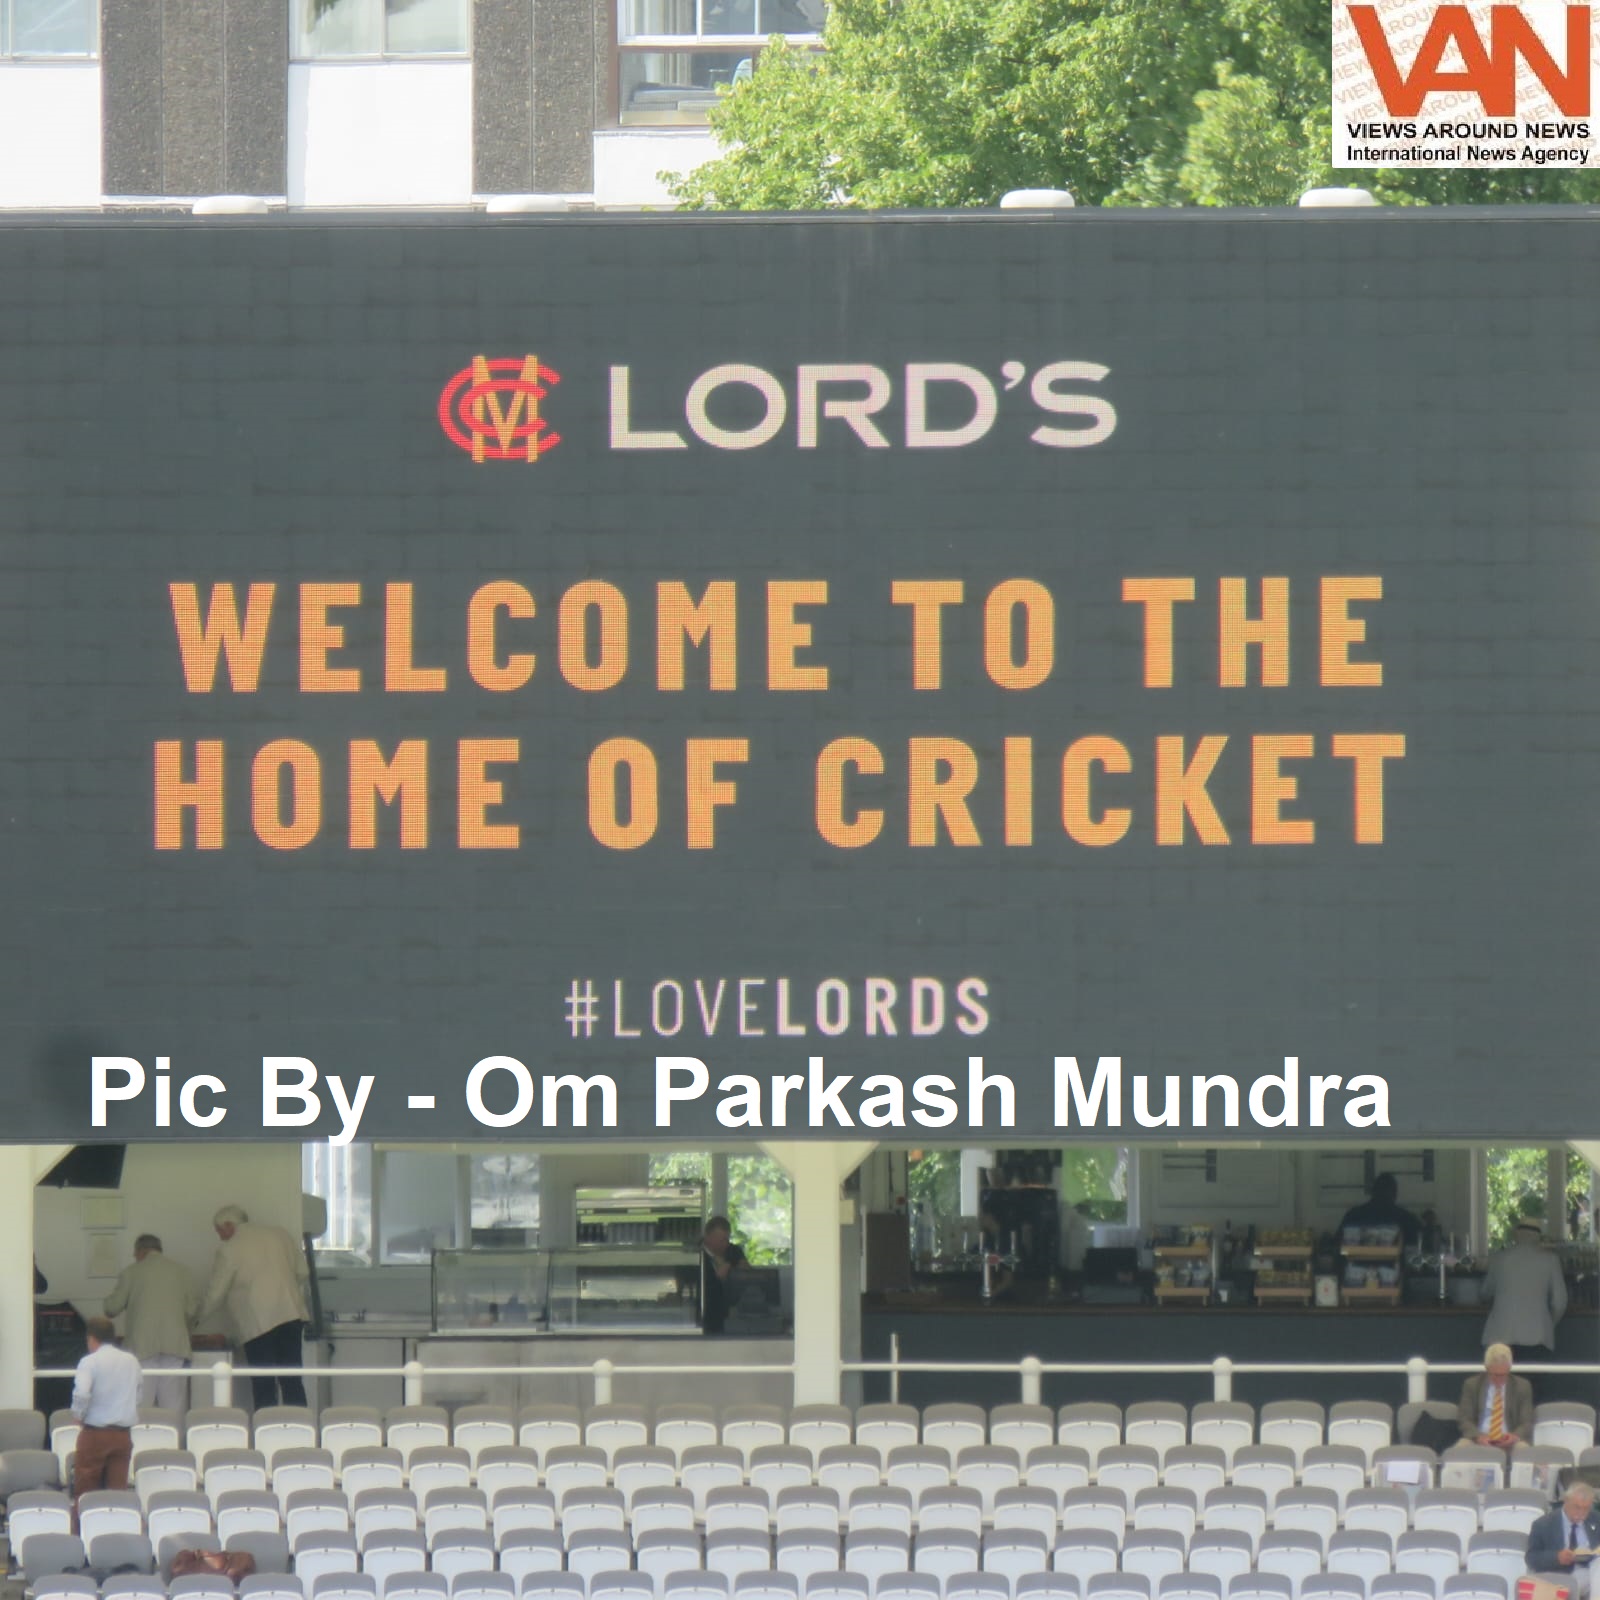 Memorable clicks from THE LORDS, LONDON of 2nd One